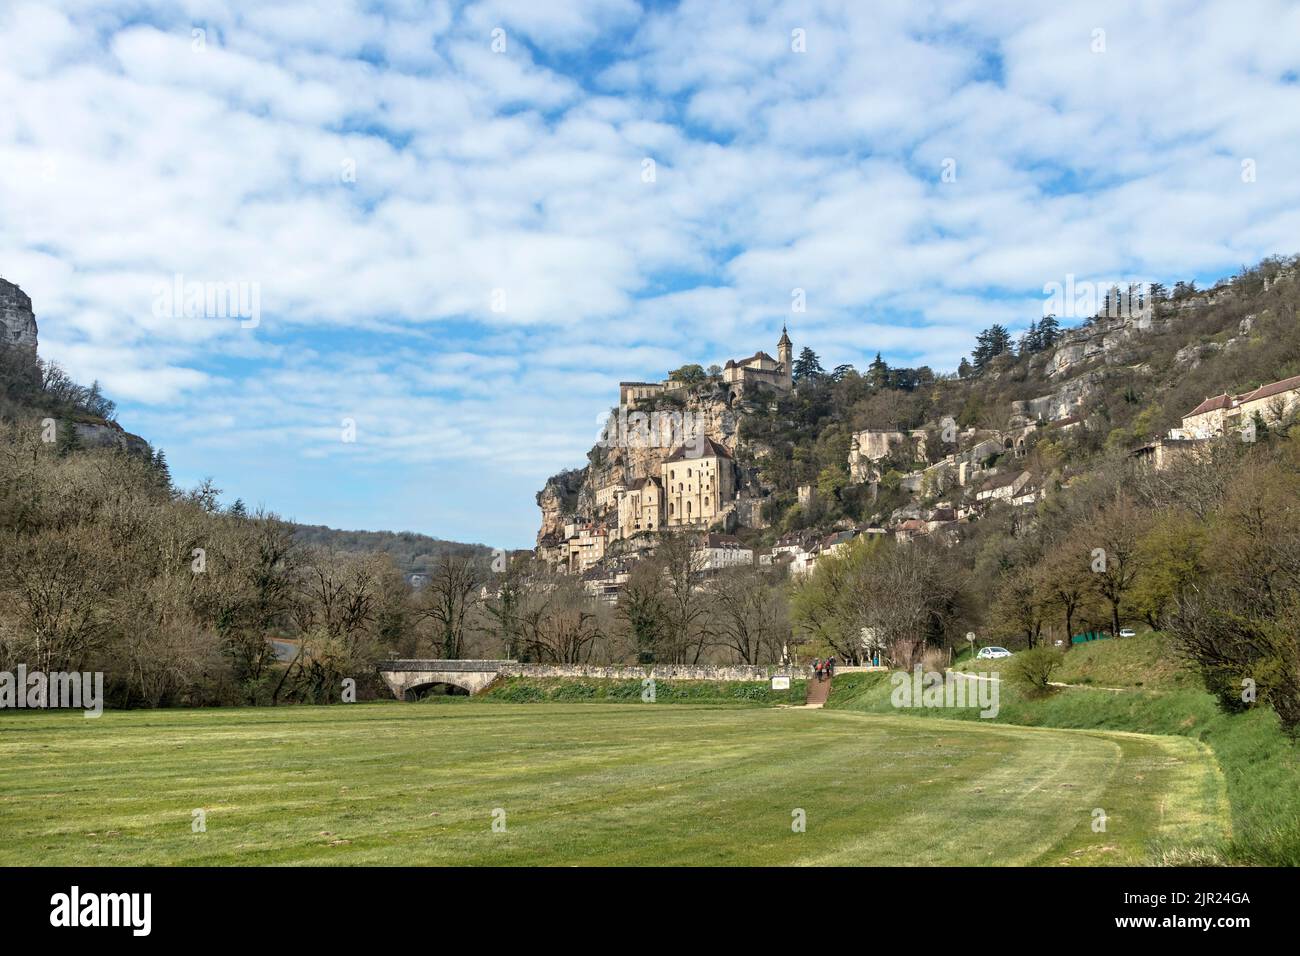 The picturesque medieval village of Rocamadour in the early spring, Dordogne valley, France. Stock Photo